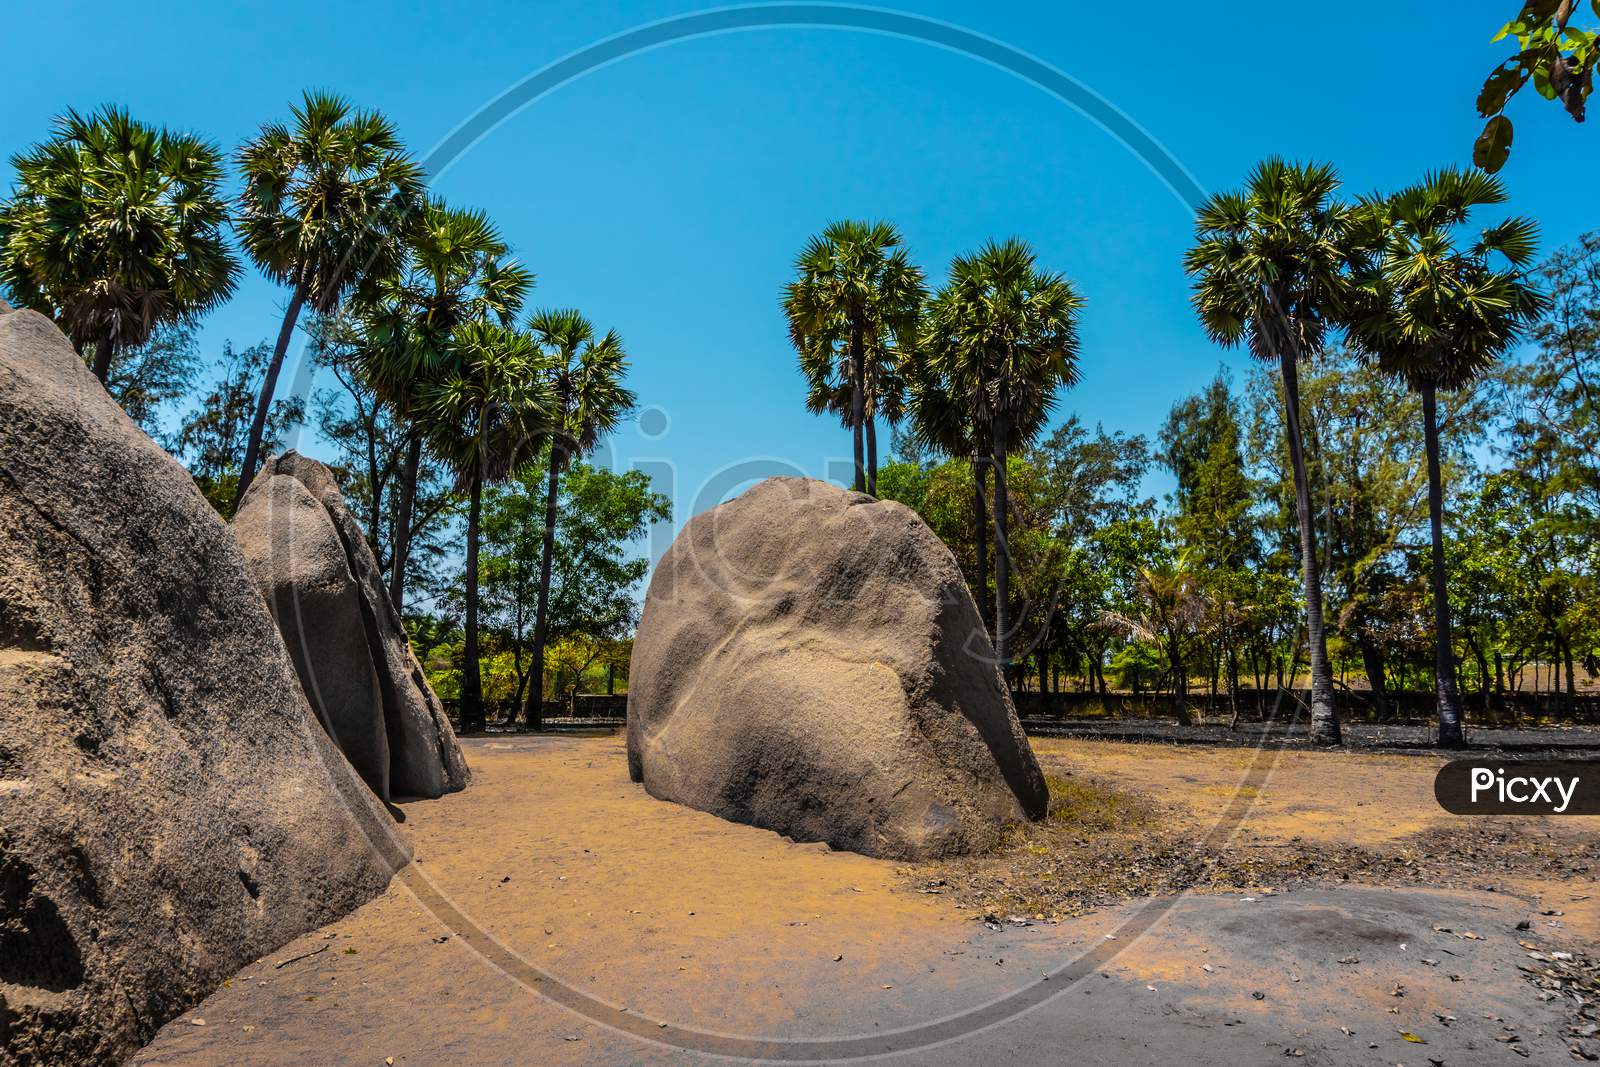 The Largest and very old rocks found near, The famous tiger cave temple is a rock-cut Hindu temple located in the hamlet near Mahabalipuram in Tamil Nadu, South India